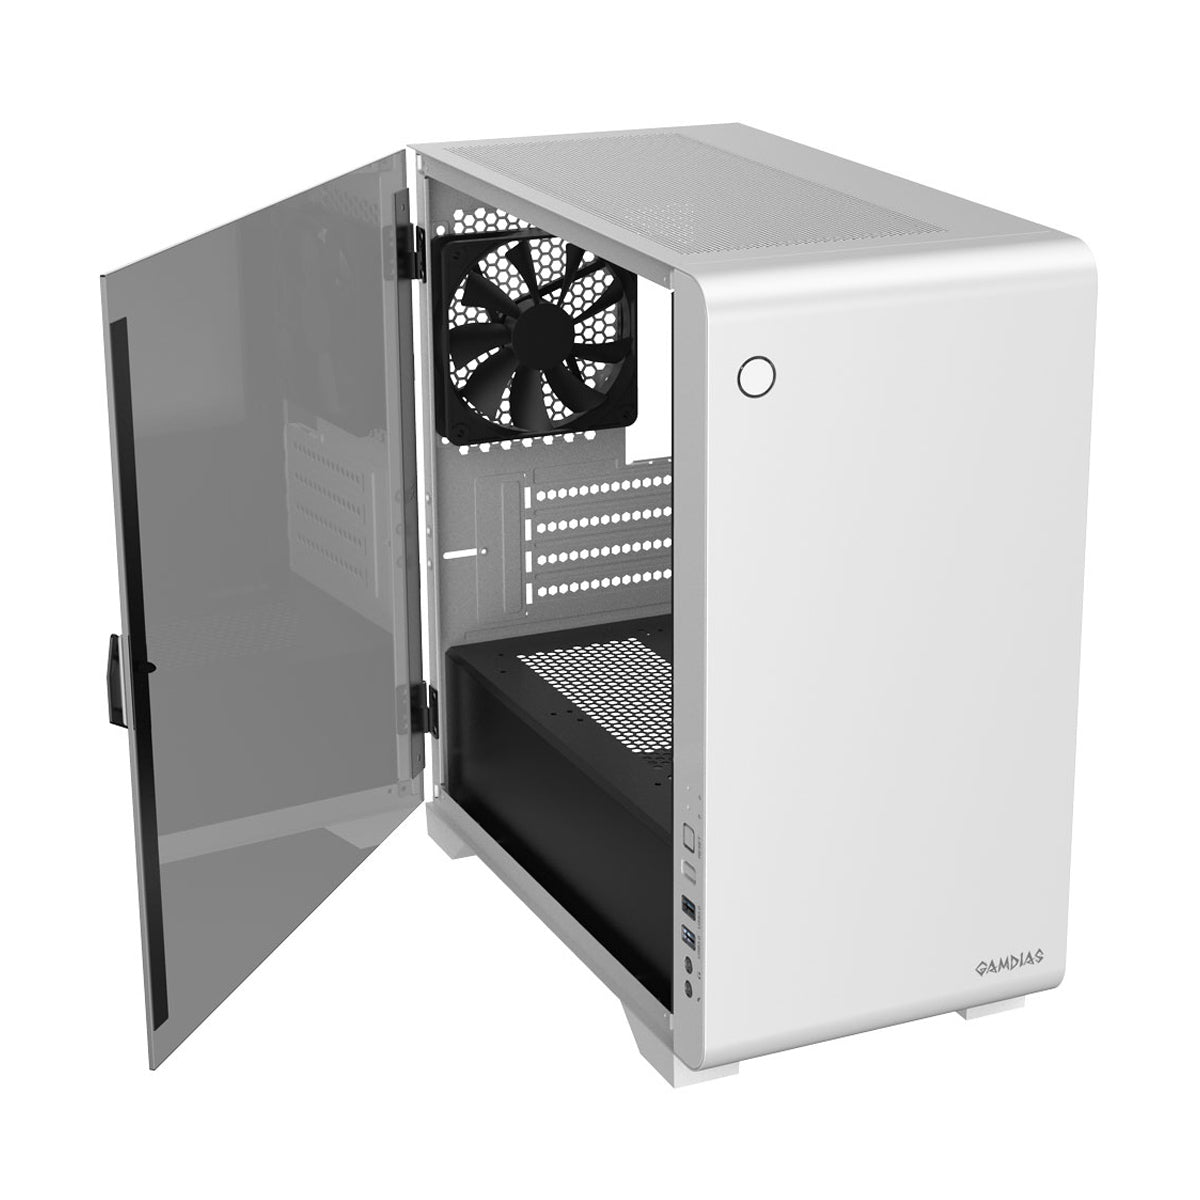 Gamdias MARS E2 Micro-Tower Gaming PC Cabinet with 120mm Fan and Tempered Glass Side Panel